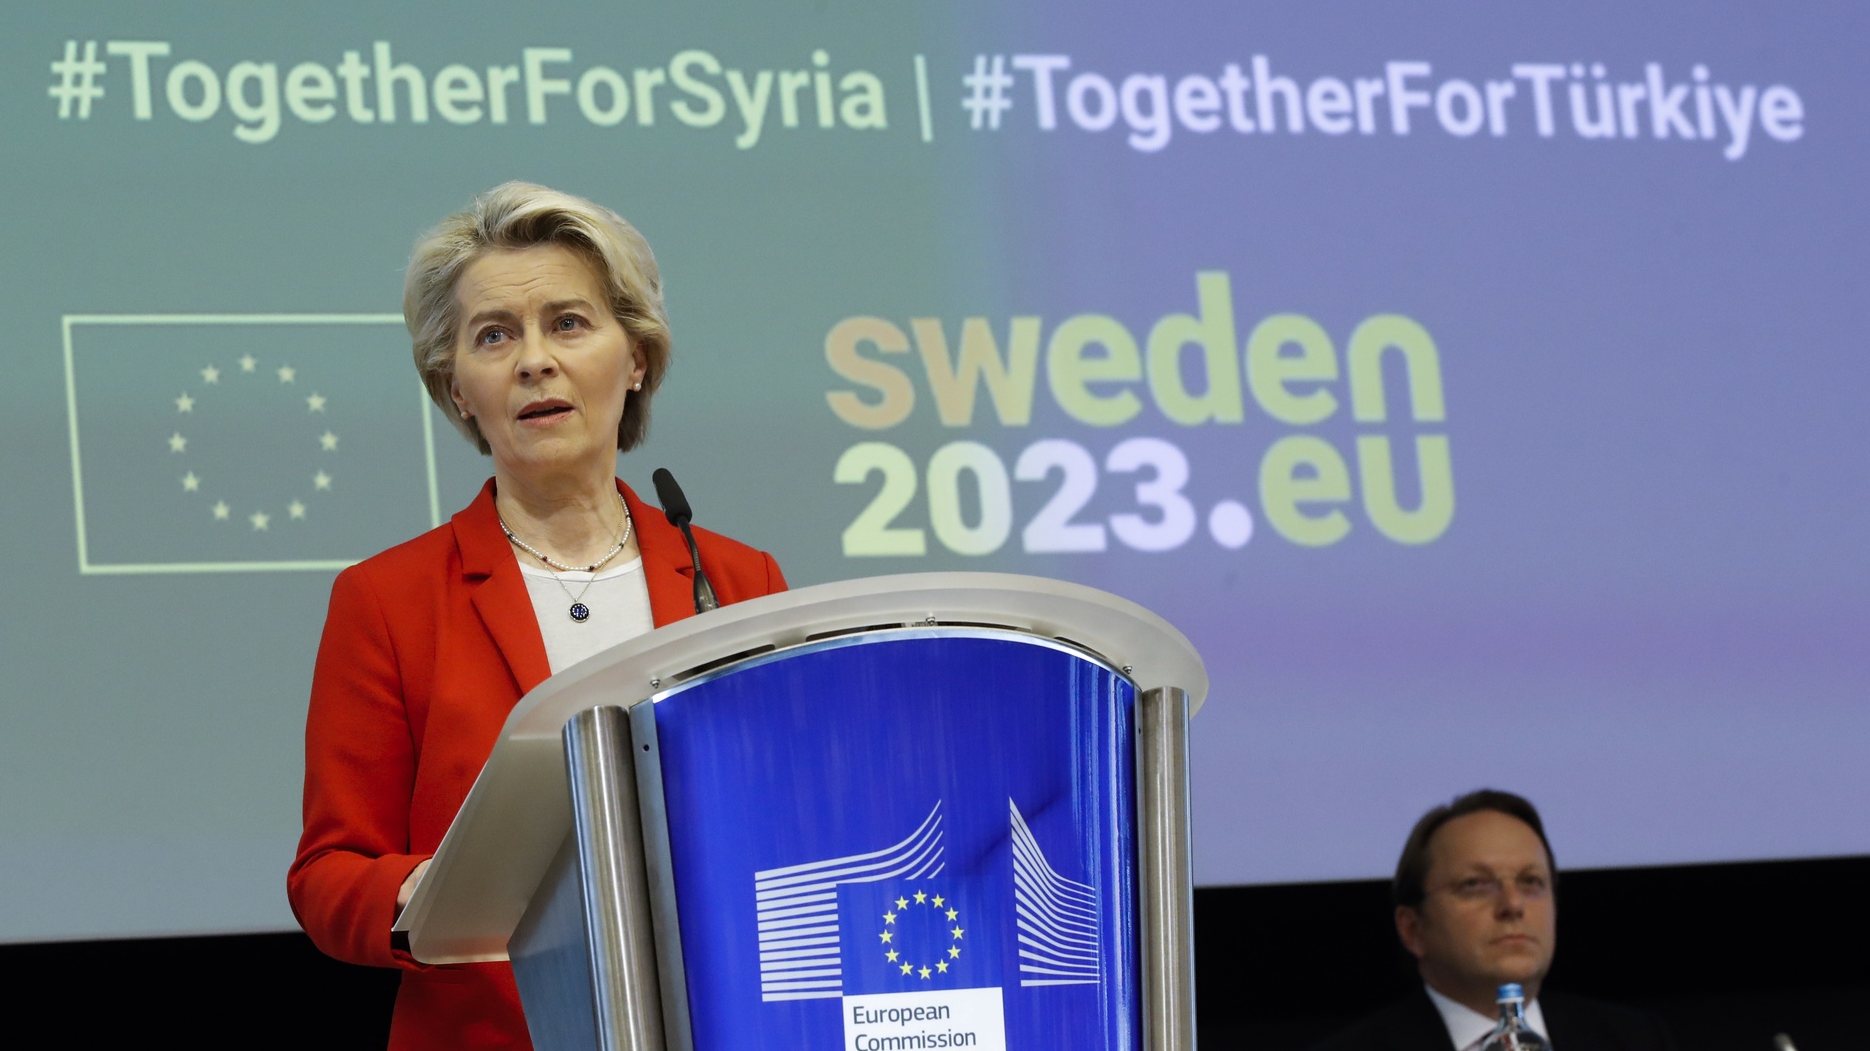 epa10533584 European Commission President Ursula von der Leyen (L) delivers a speech at the opening of an international donors&#039; conference in support of the people in earthquake stricken regions in Turkey and Syria, in Brussels, Belgium, 20 March 2023. More than 50,000 people died and thousands more were injured after major earthquakes struck southern Turkey and northern Syria on 06 February and again on 20 February 2023. Hundreds of thousands were left homeless.  EPA/OLIVIER HOSLET